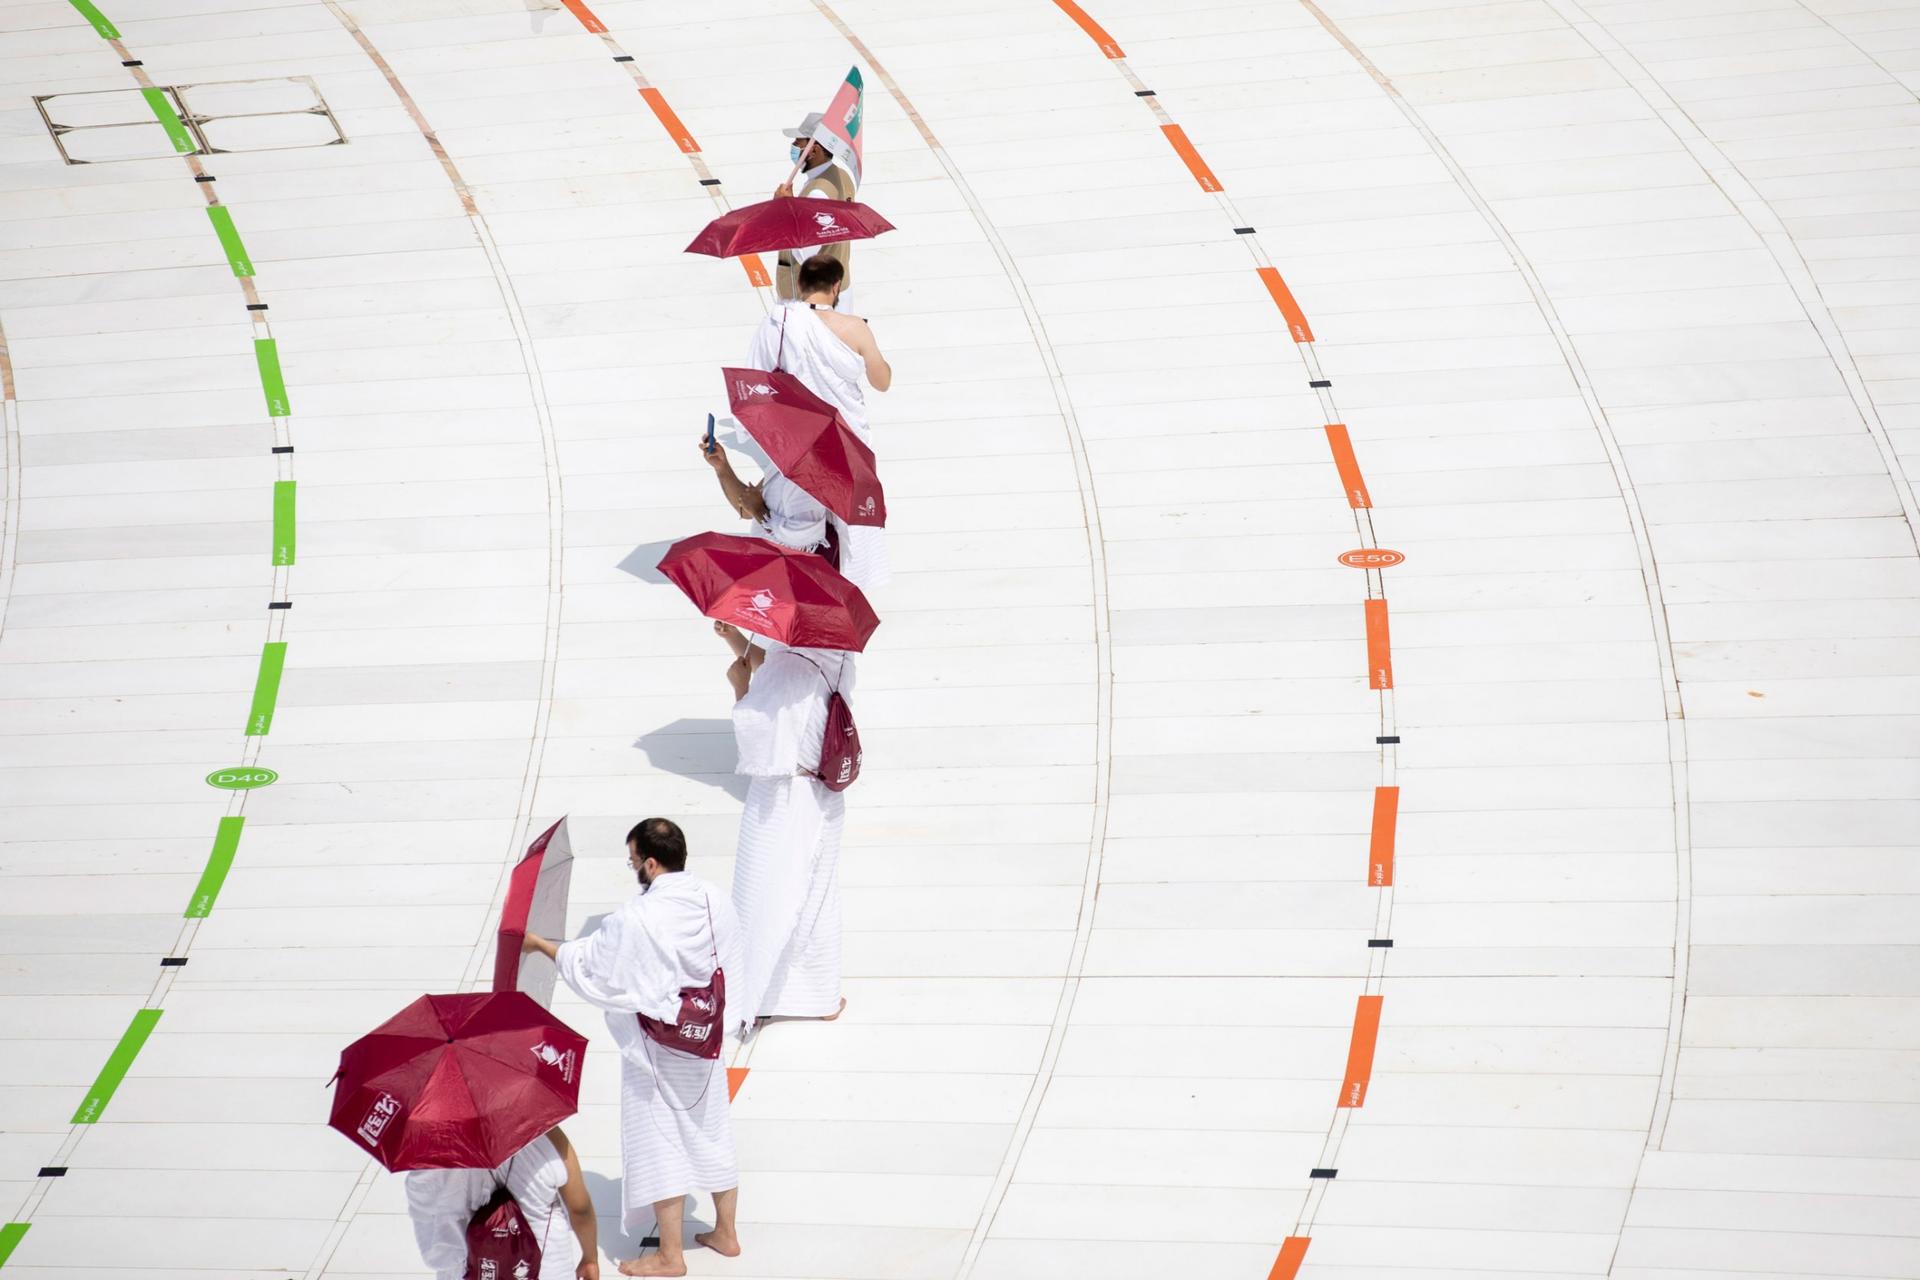 A line of people are shown wearing white robes and carrying red umbrellas.